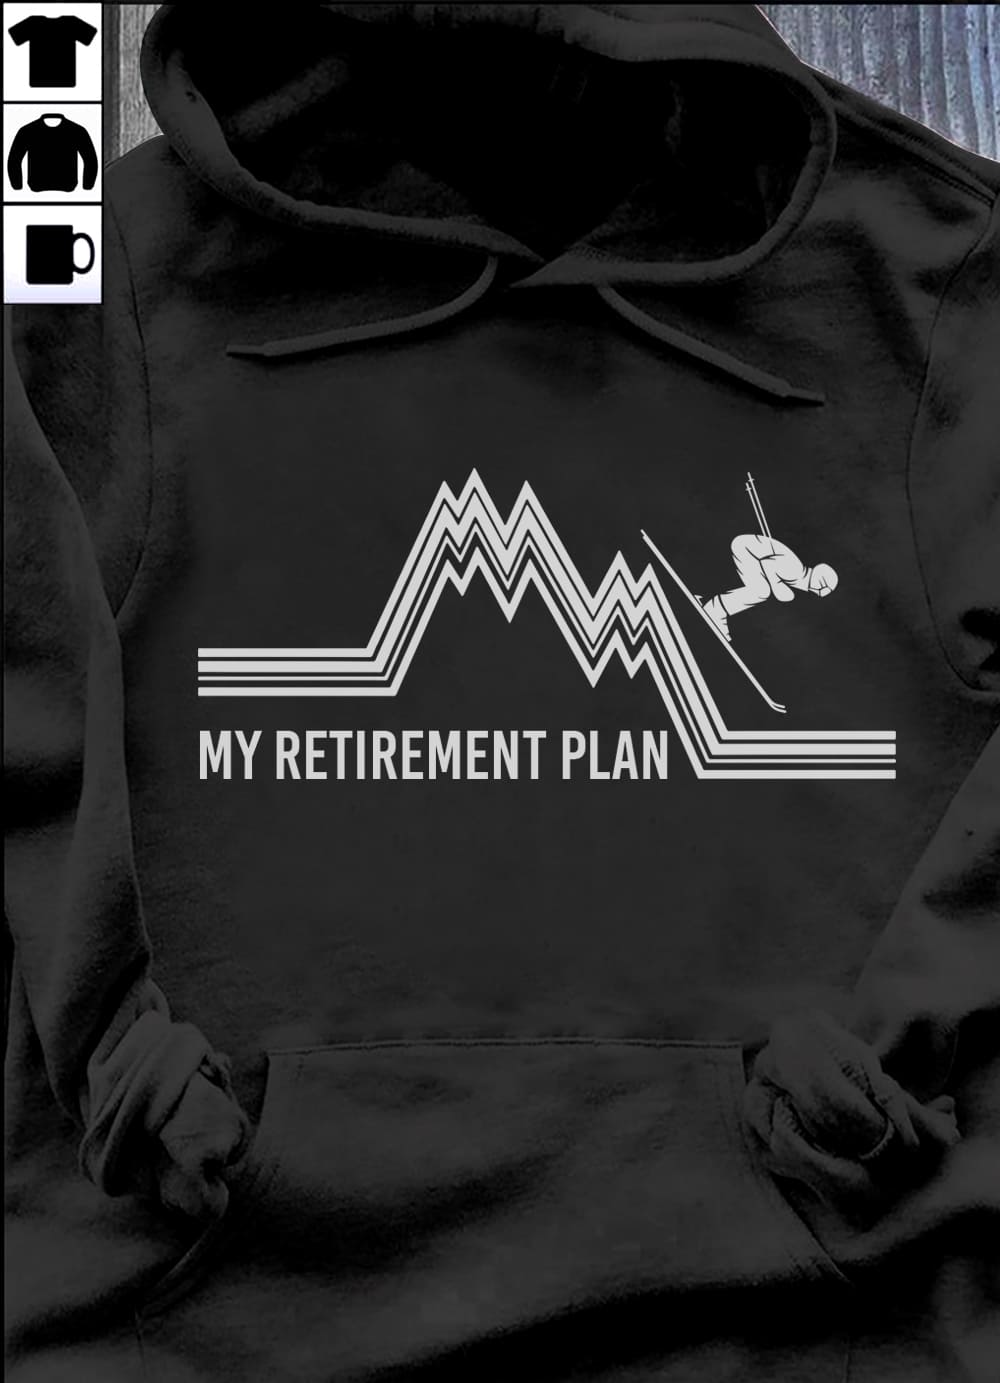 My retirement plan - Gift for skiing person, love to go skiing, skiing risky sport